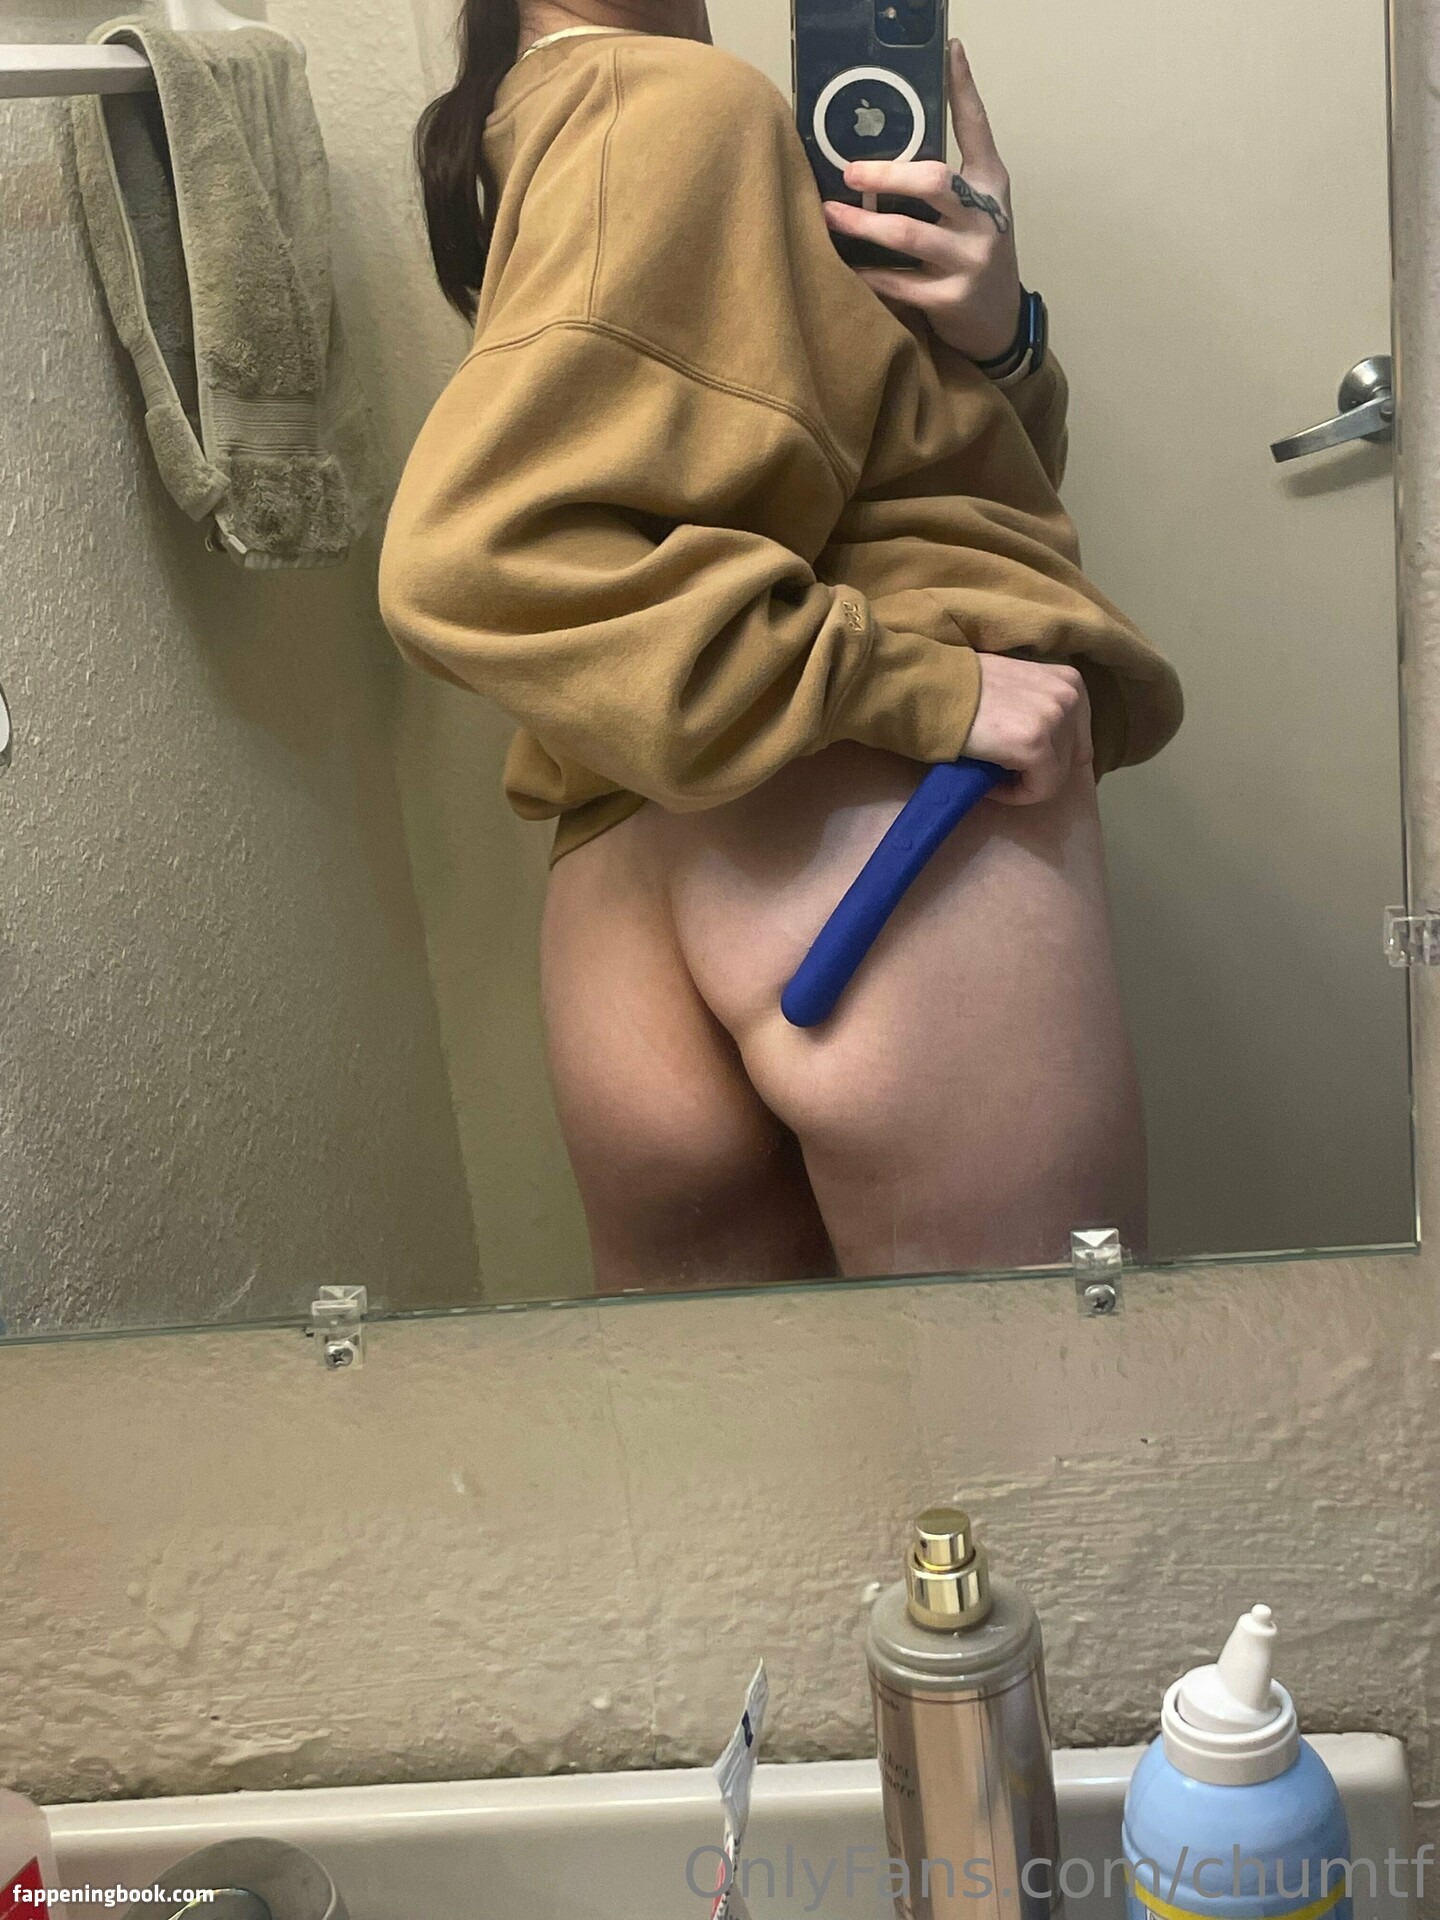 chumtf Nude OnlyFans Leaks